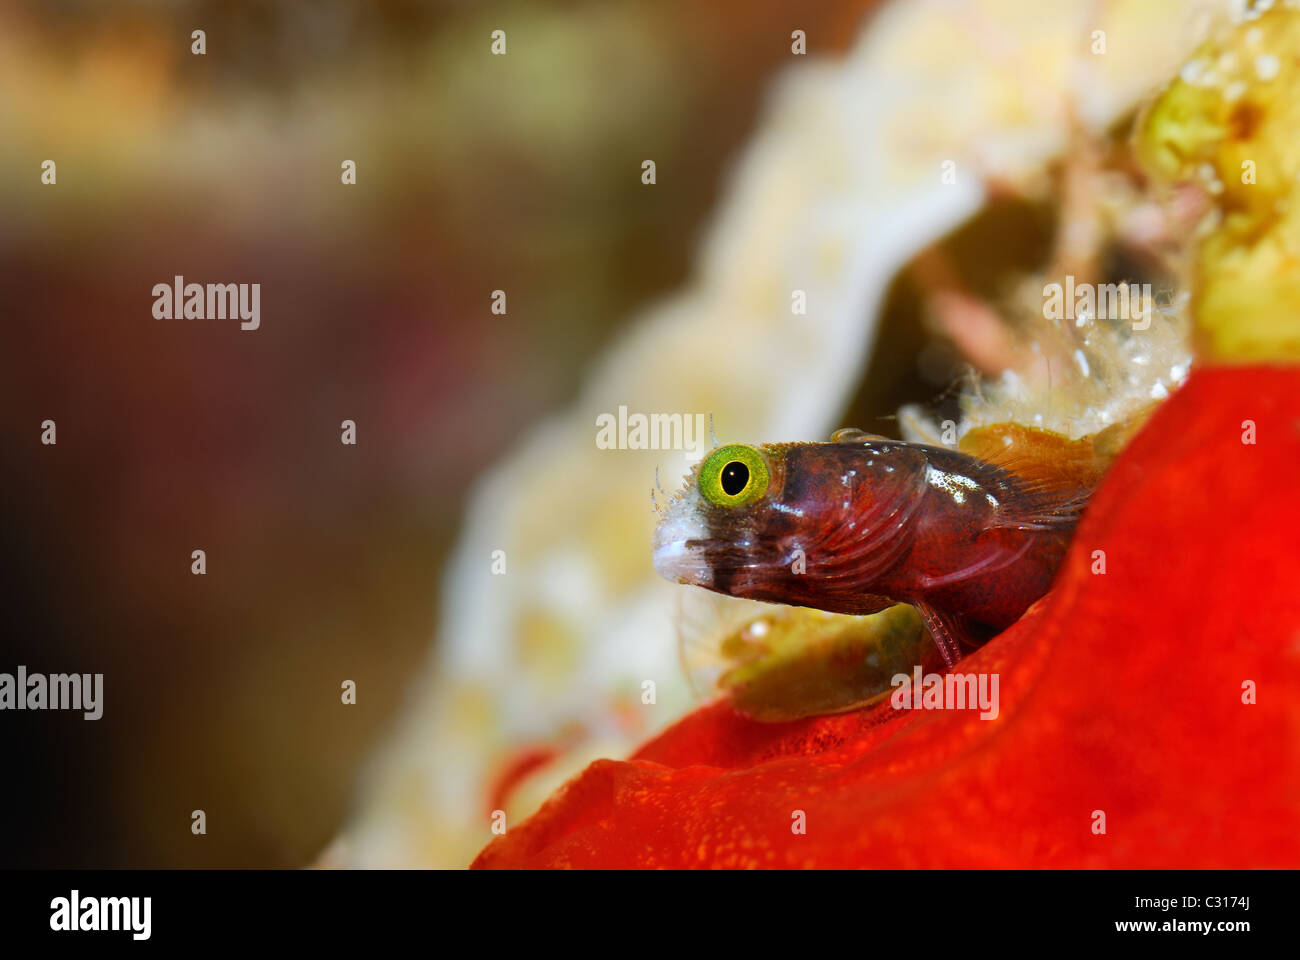 A microscopic-sized goby fish peers out from his hole in the beautiful and colorful coral reef scene. Stock Photo